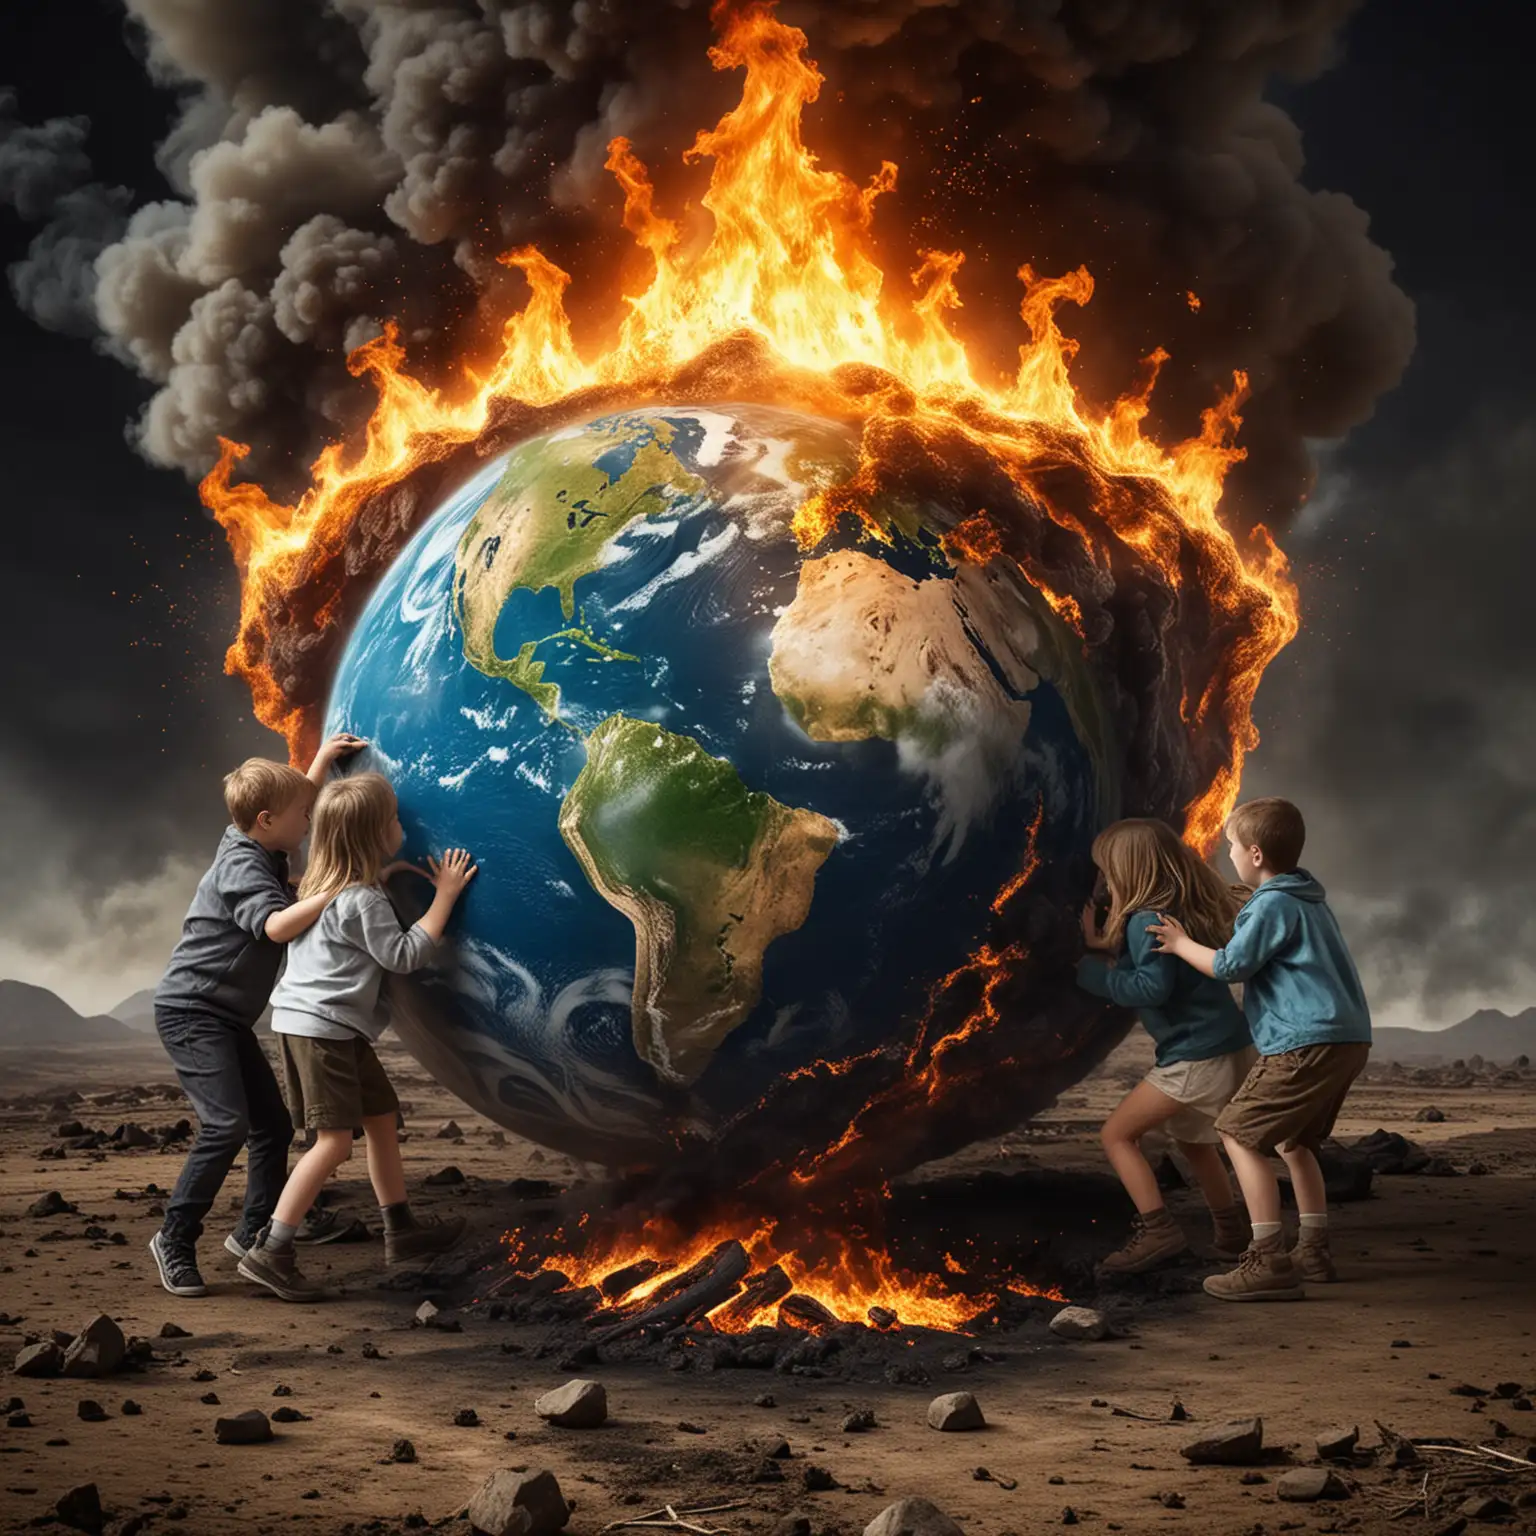 Children Bravely Extinguishing Flames on Fiery Earth